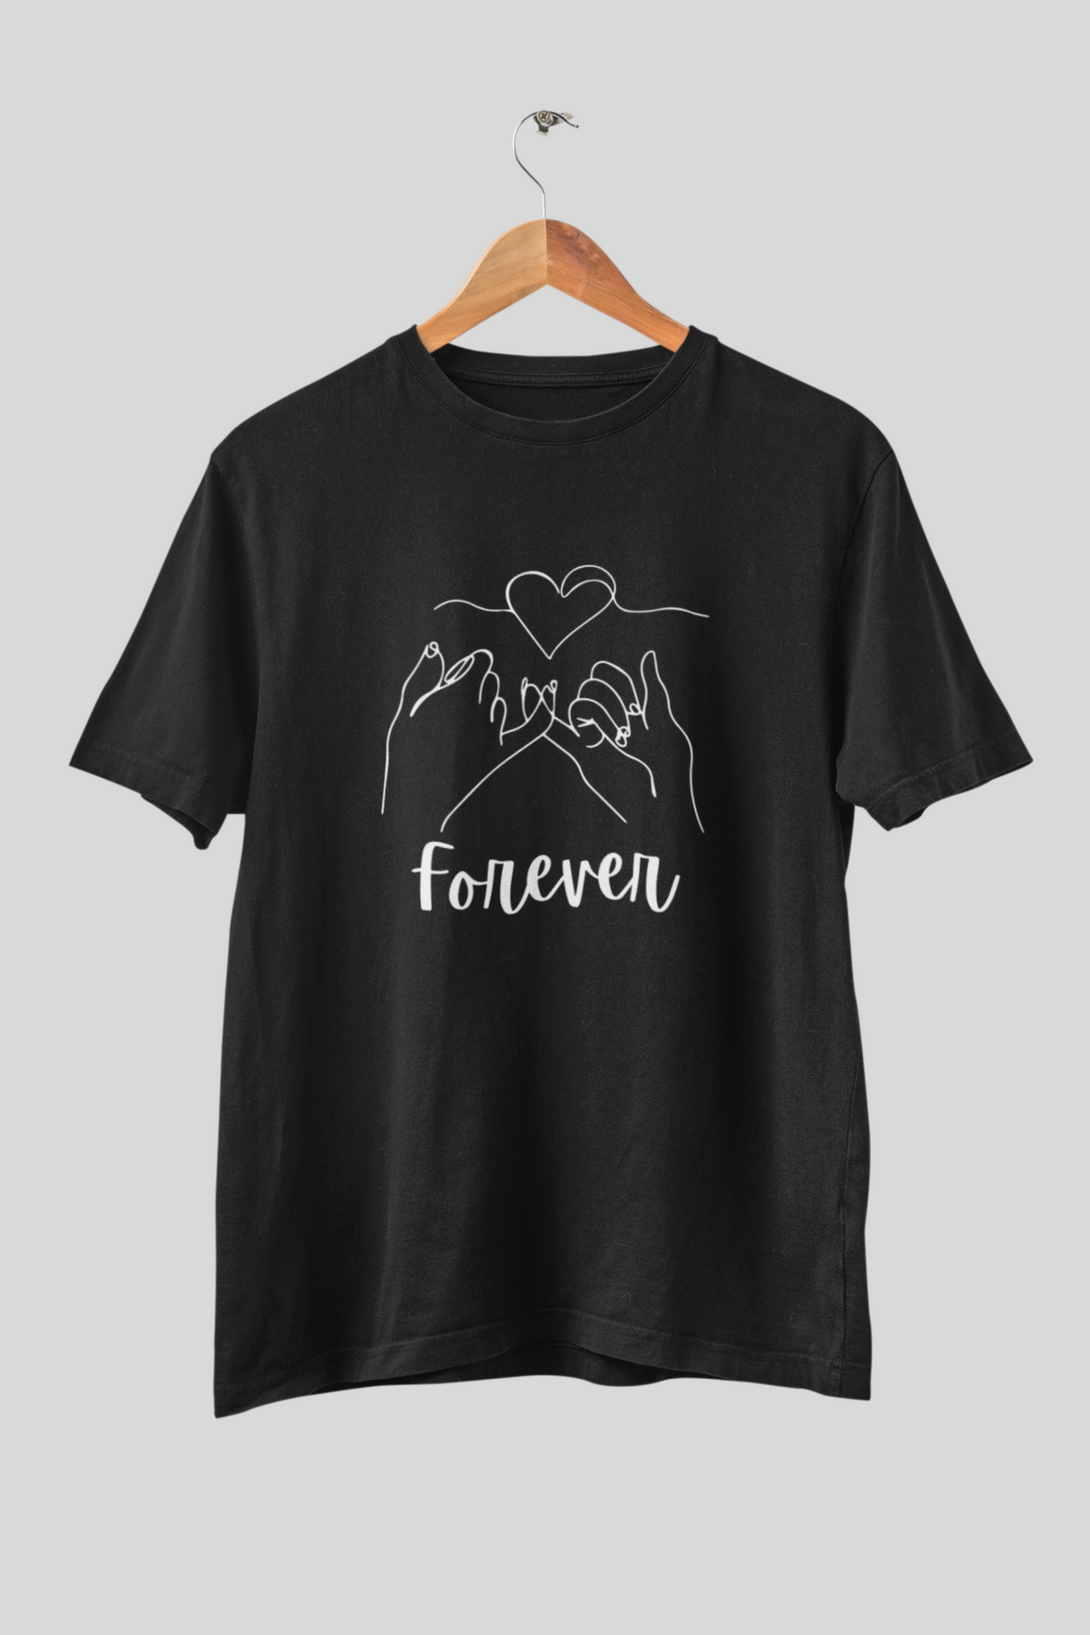 Soulmate Forever Couple T Shirt - WowWaves - 3